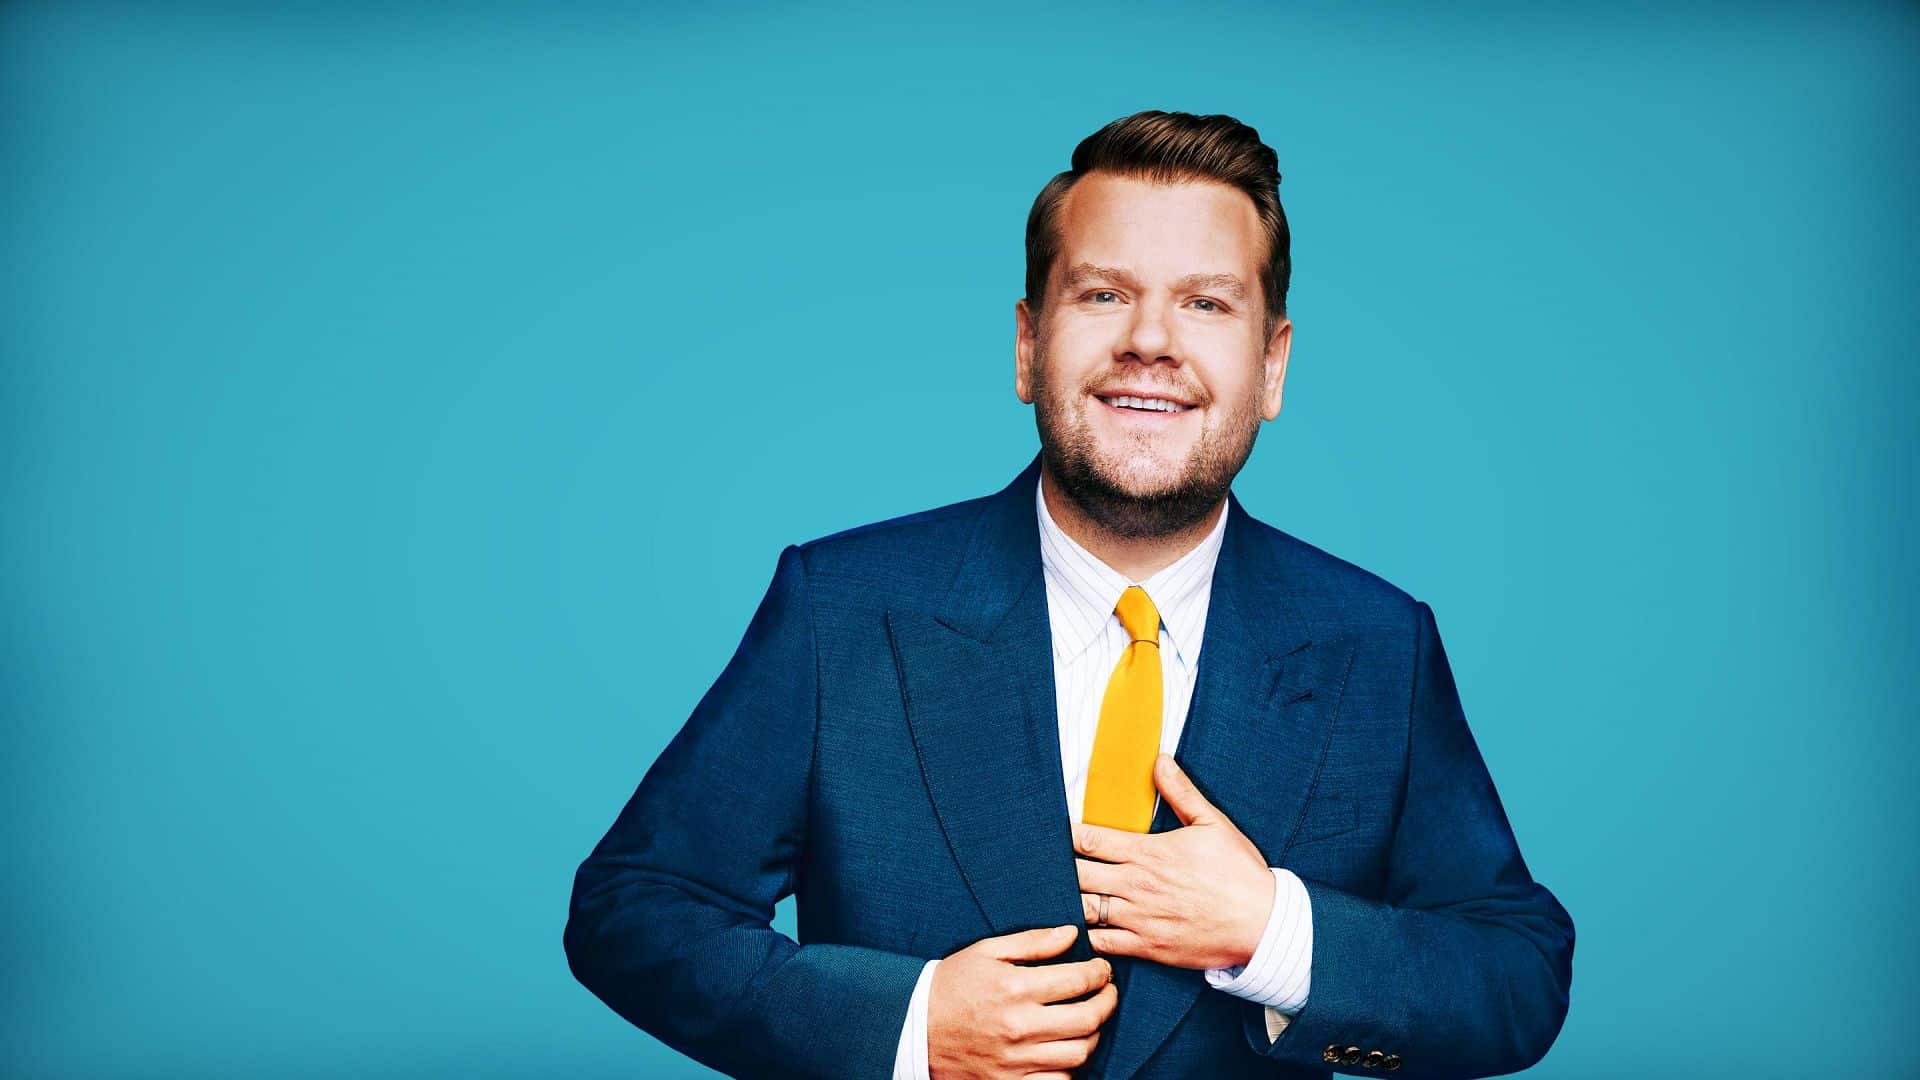 James Corden's The Late Late Show